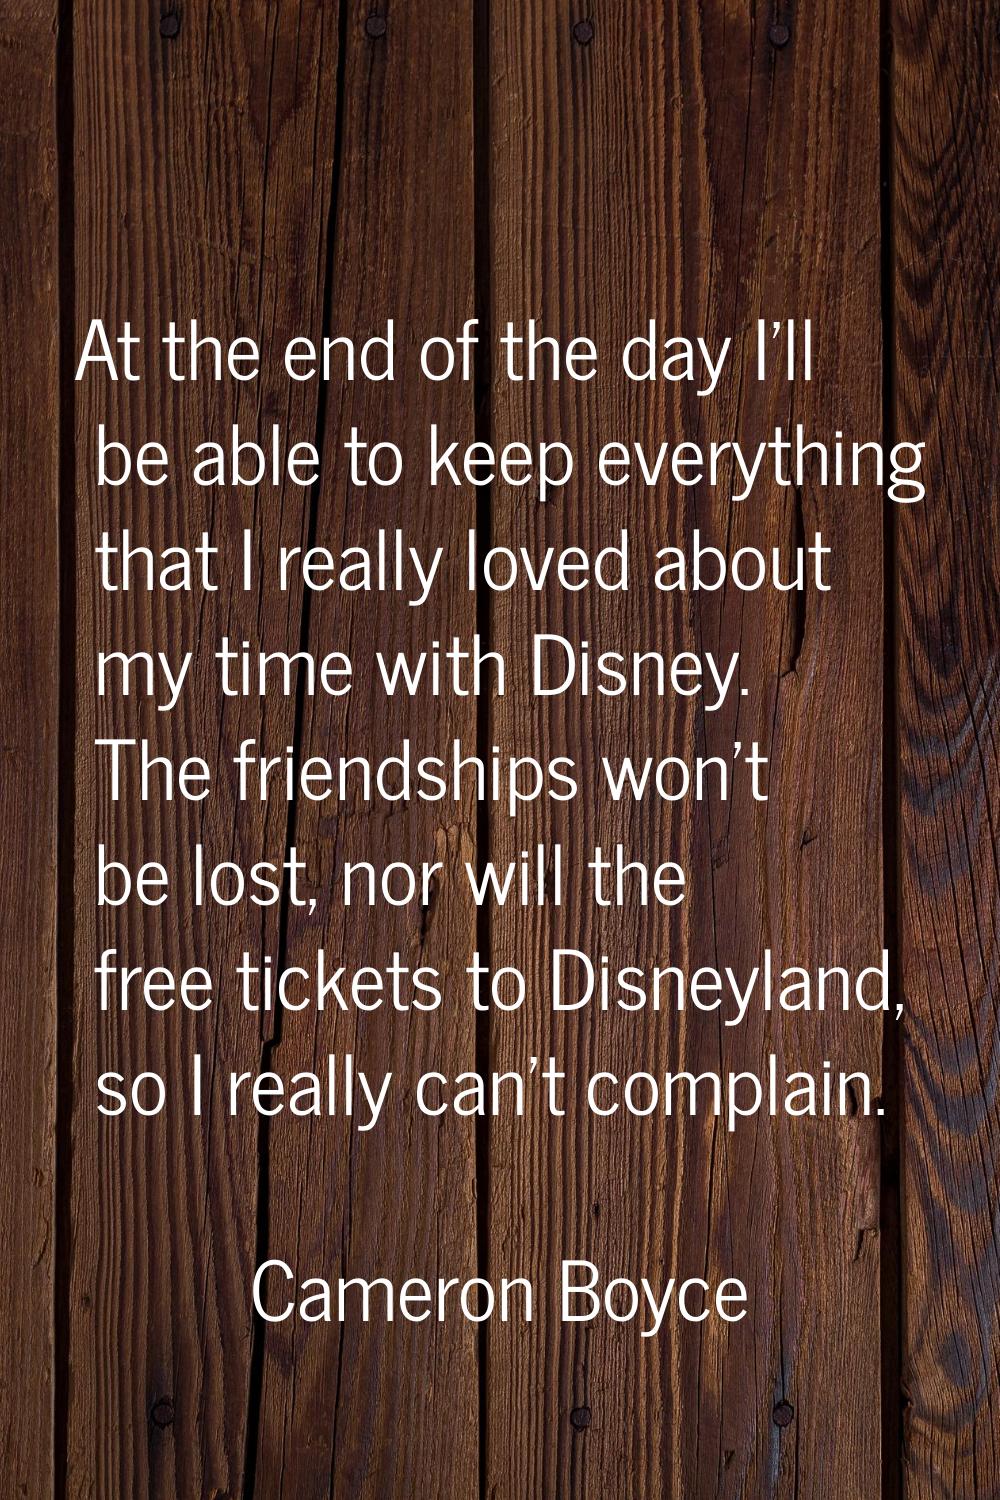 At the end of the day I'll be able to keep everything that I really loved about my time with Disney